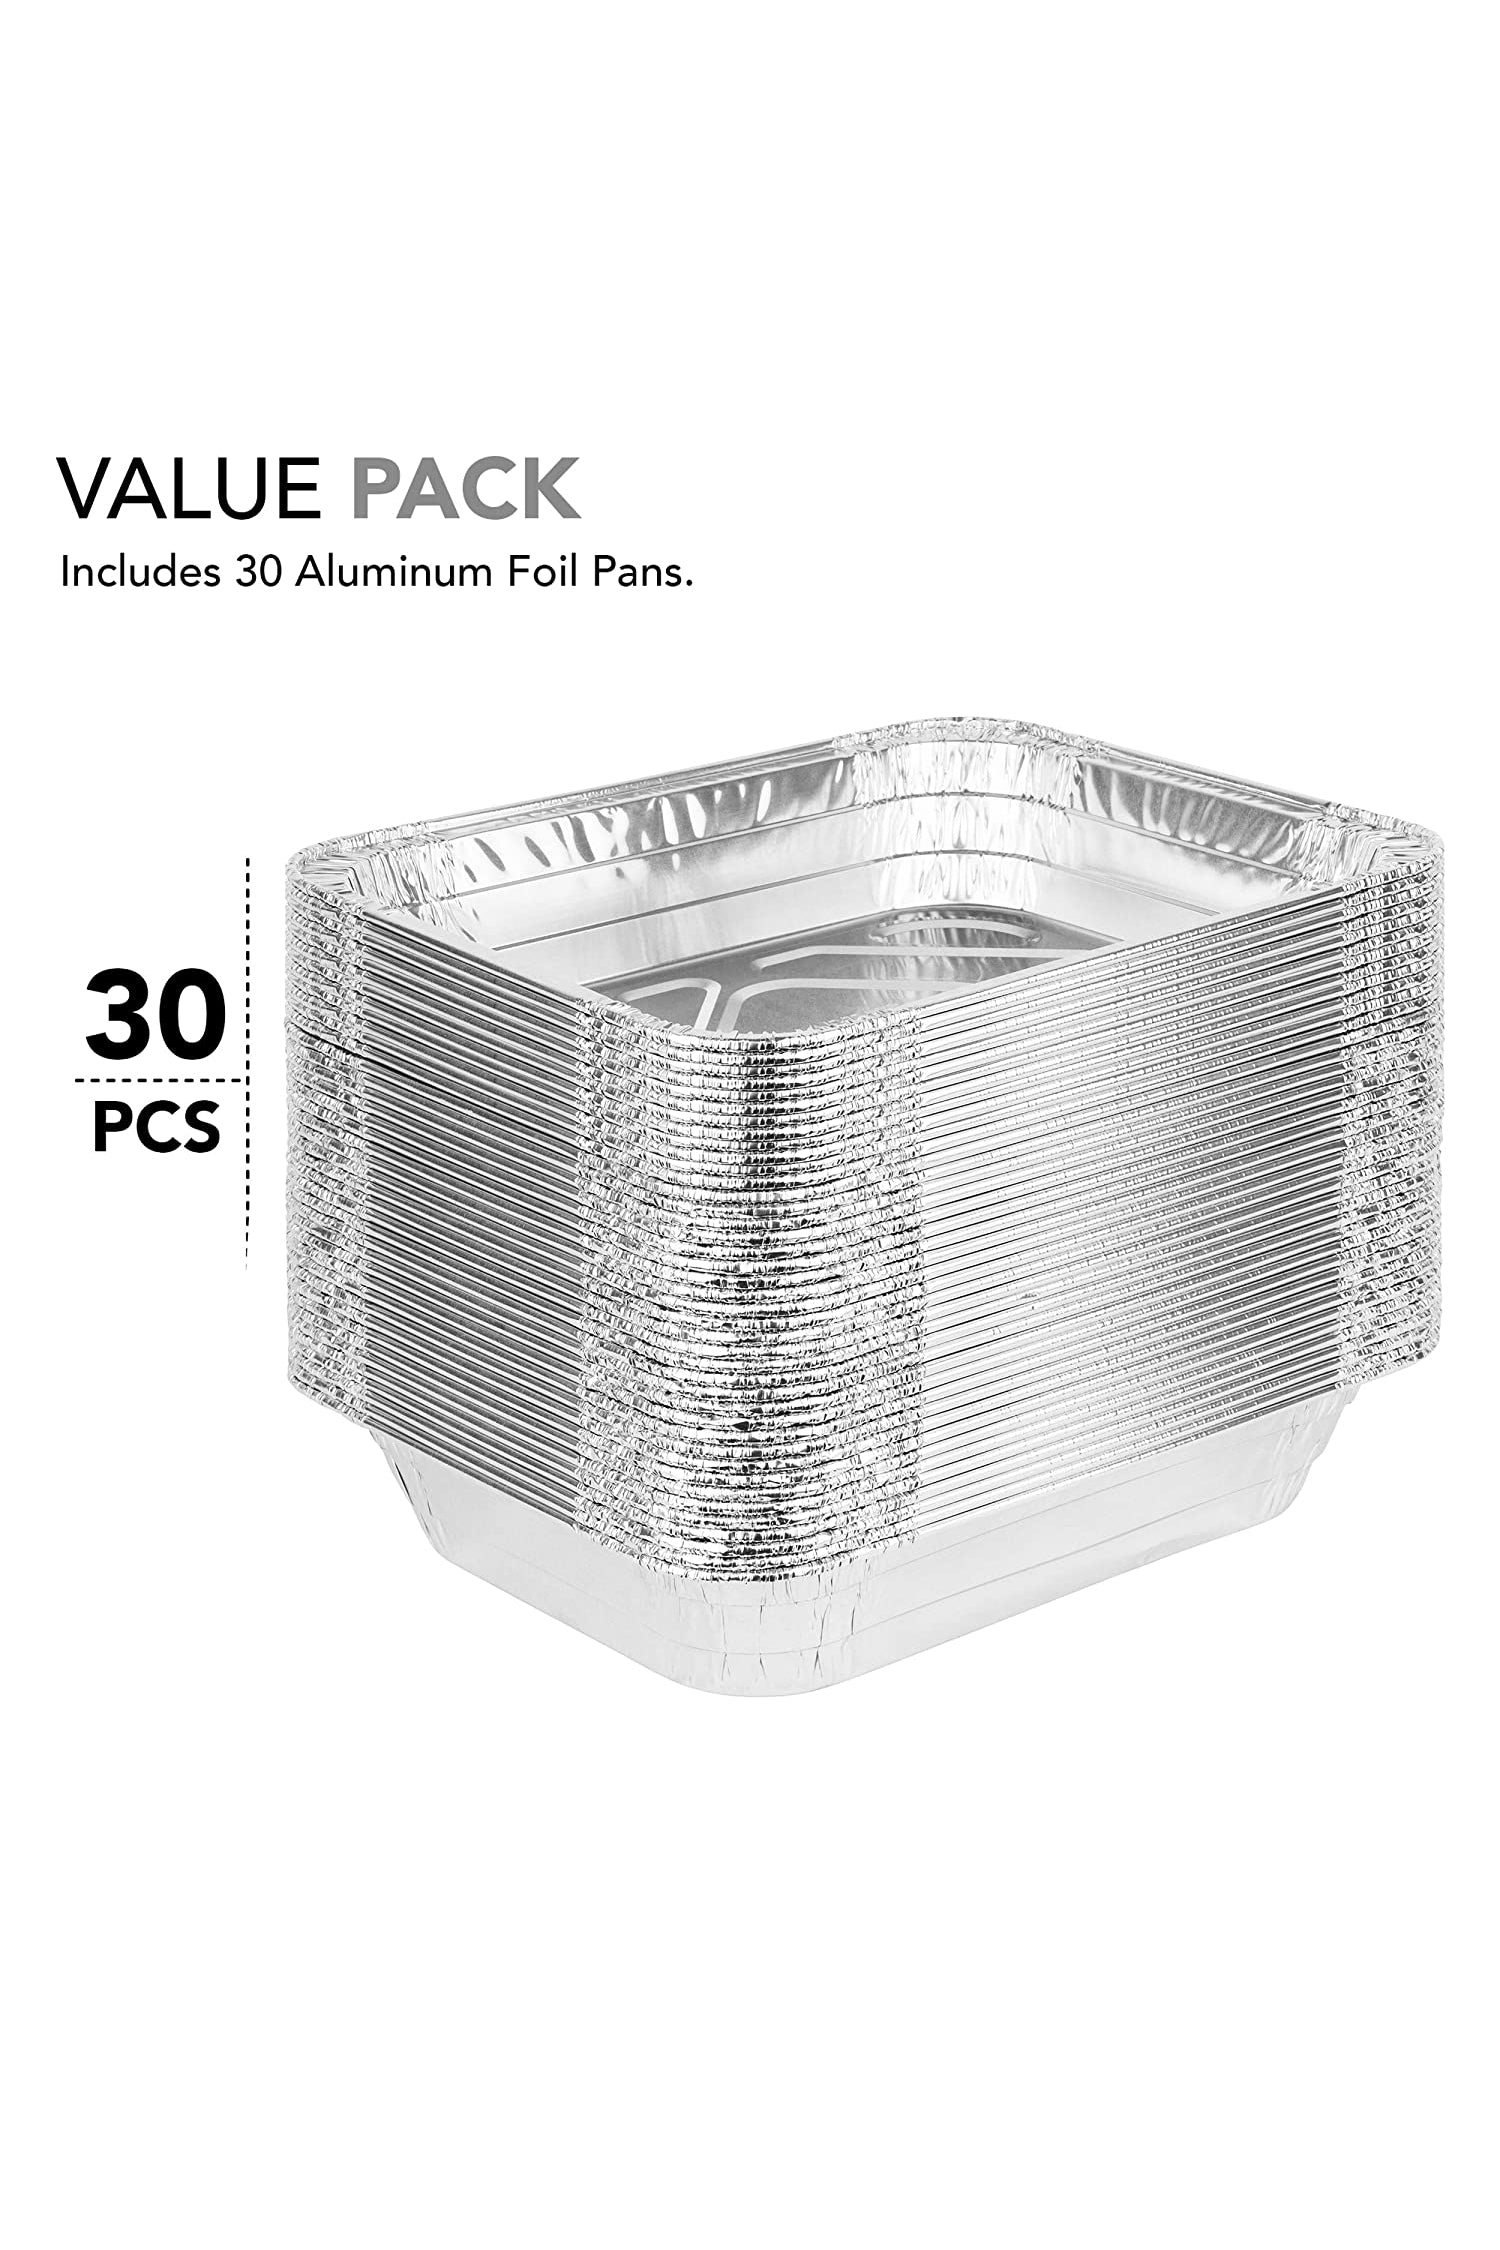 9x13 Aluminum Pans Disposable (30-Pack) - HEAVY DUTY - Half-Size Deep Foil  Pans. Great for Baking, Cooking, Grilling, Serving & Lining Steam-Table